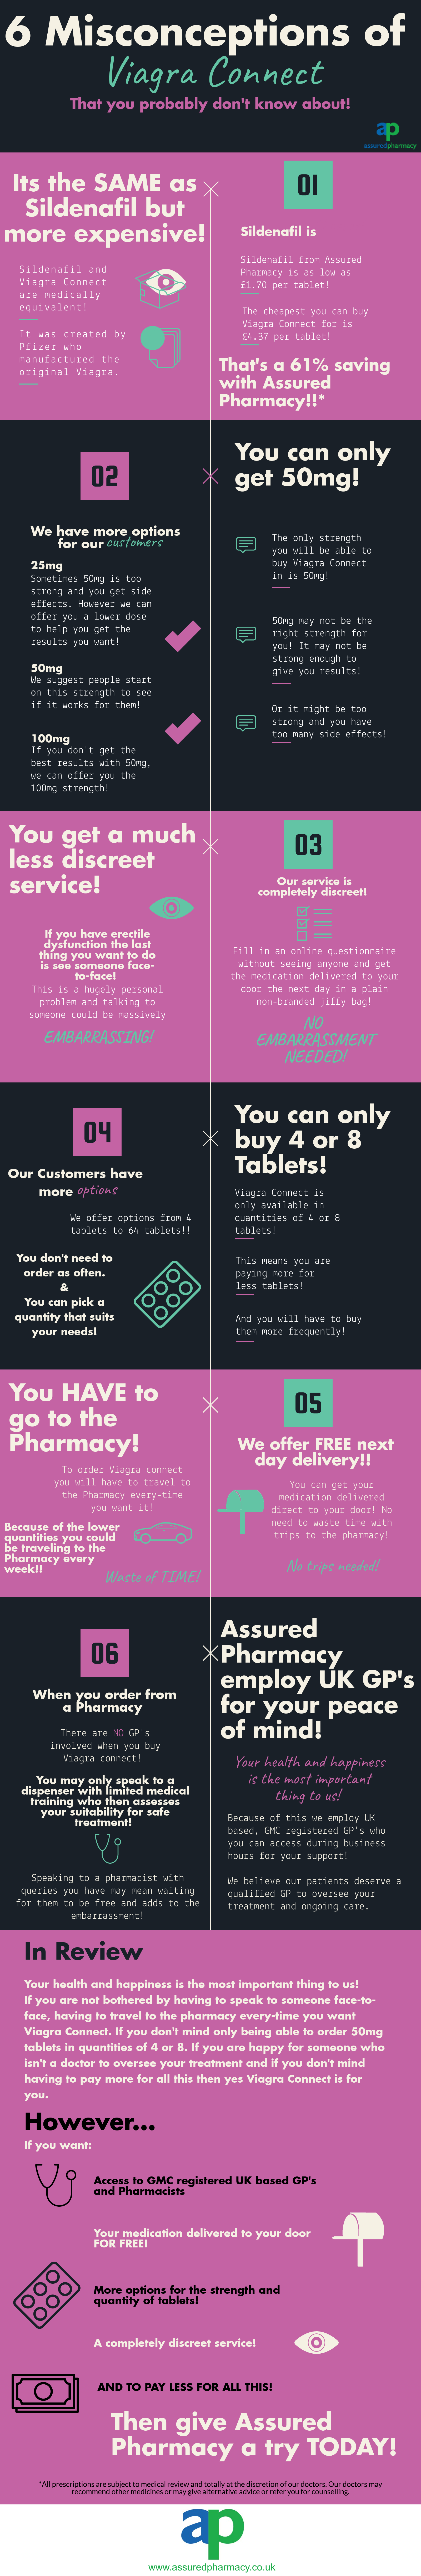 6 misconceptions of viagra connect Infographic